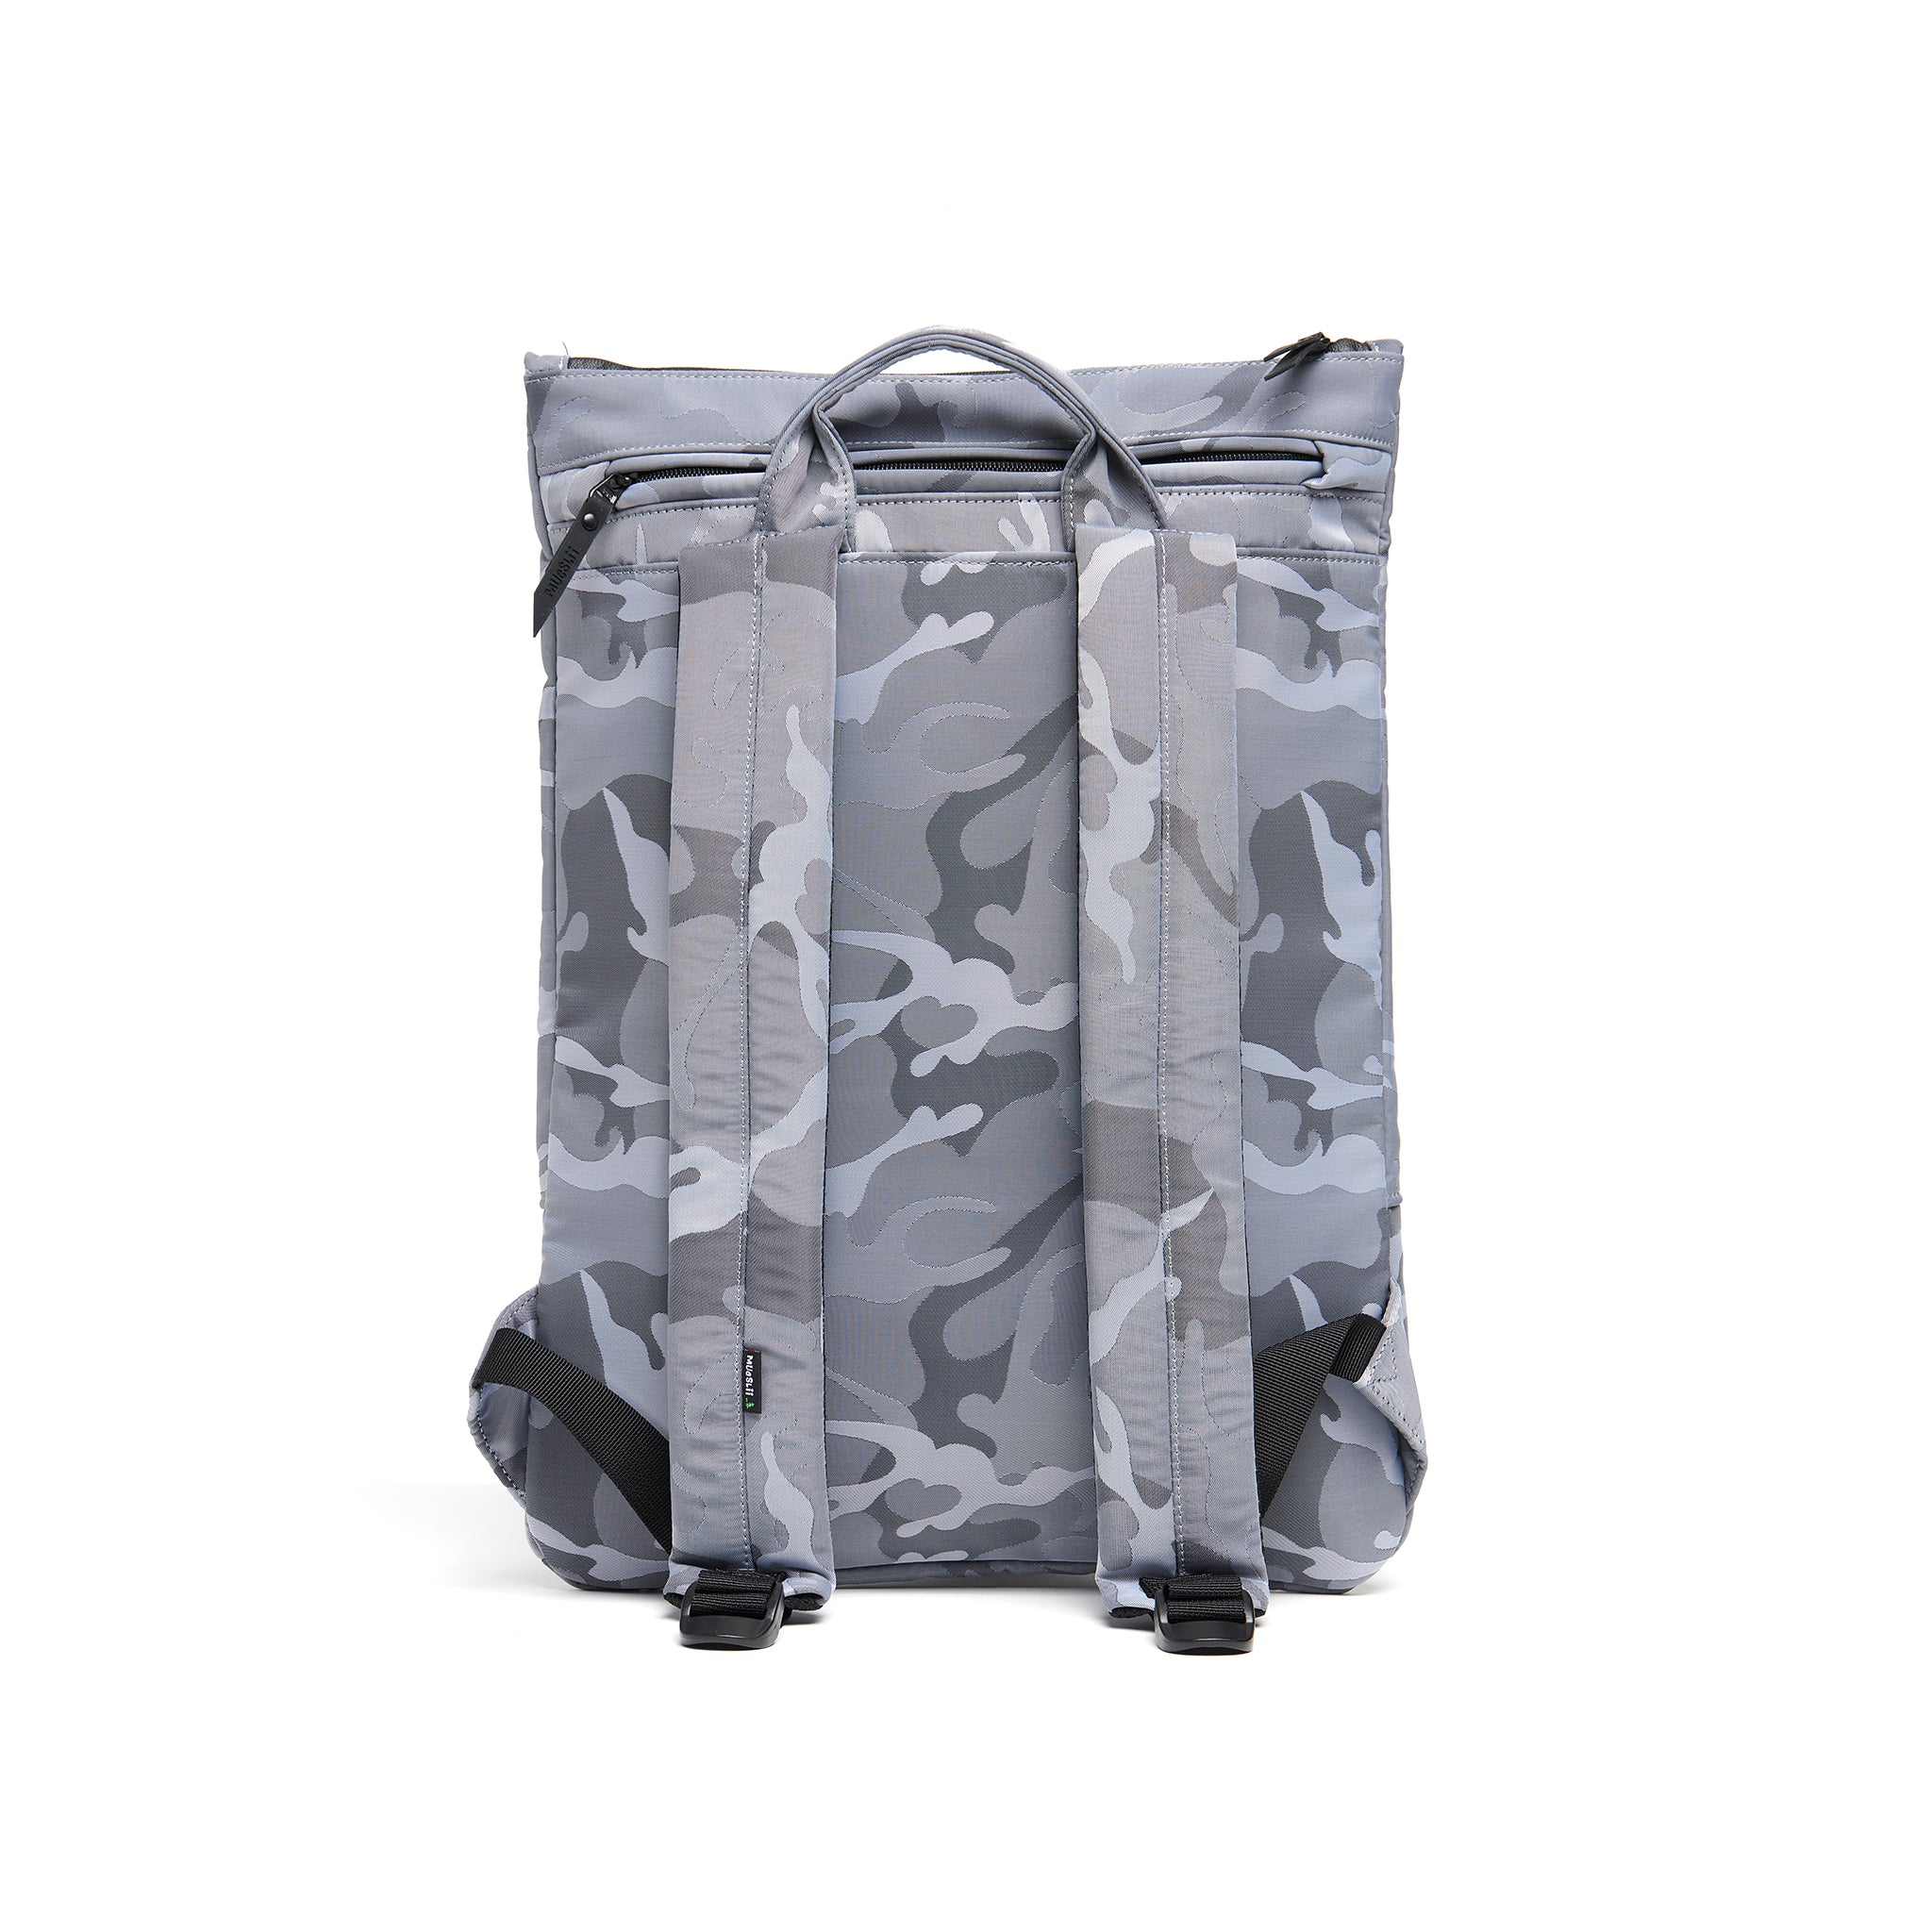 Mueslii light backpack, made of jacquard  waterproof nylon, with a laptop compartment, pattern camouflage, color silver, back view.